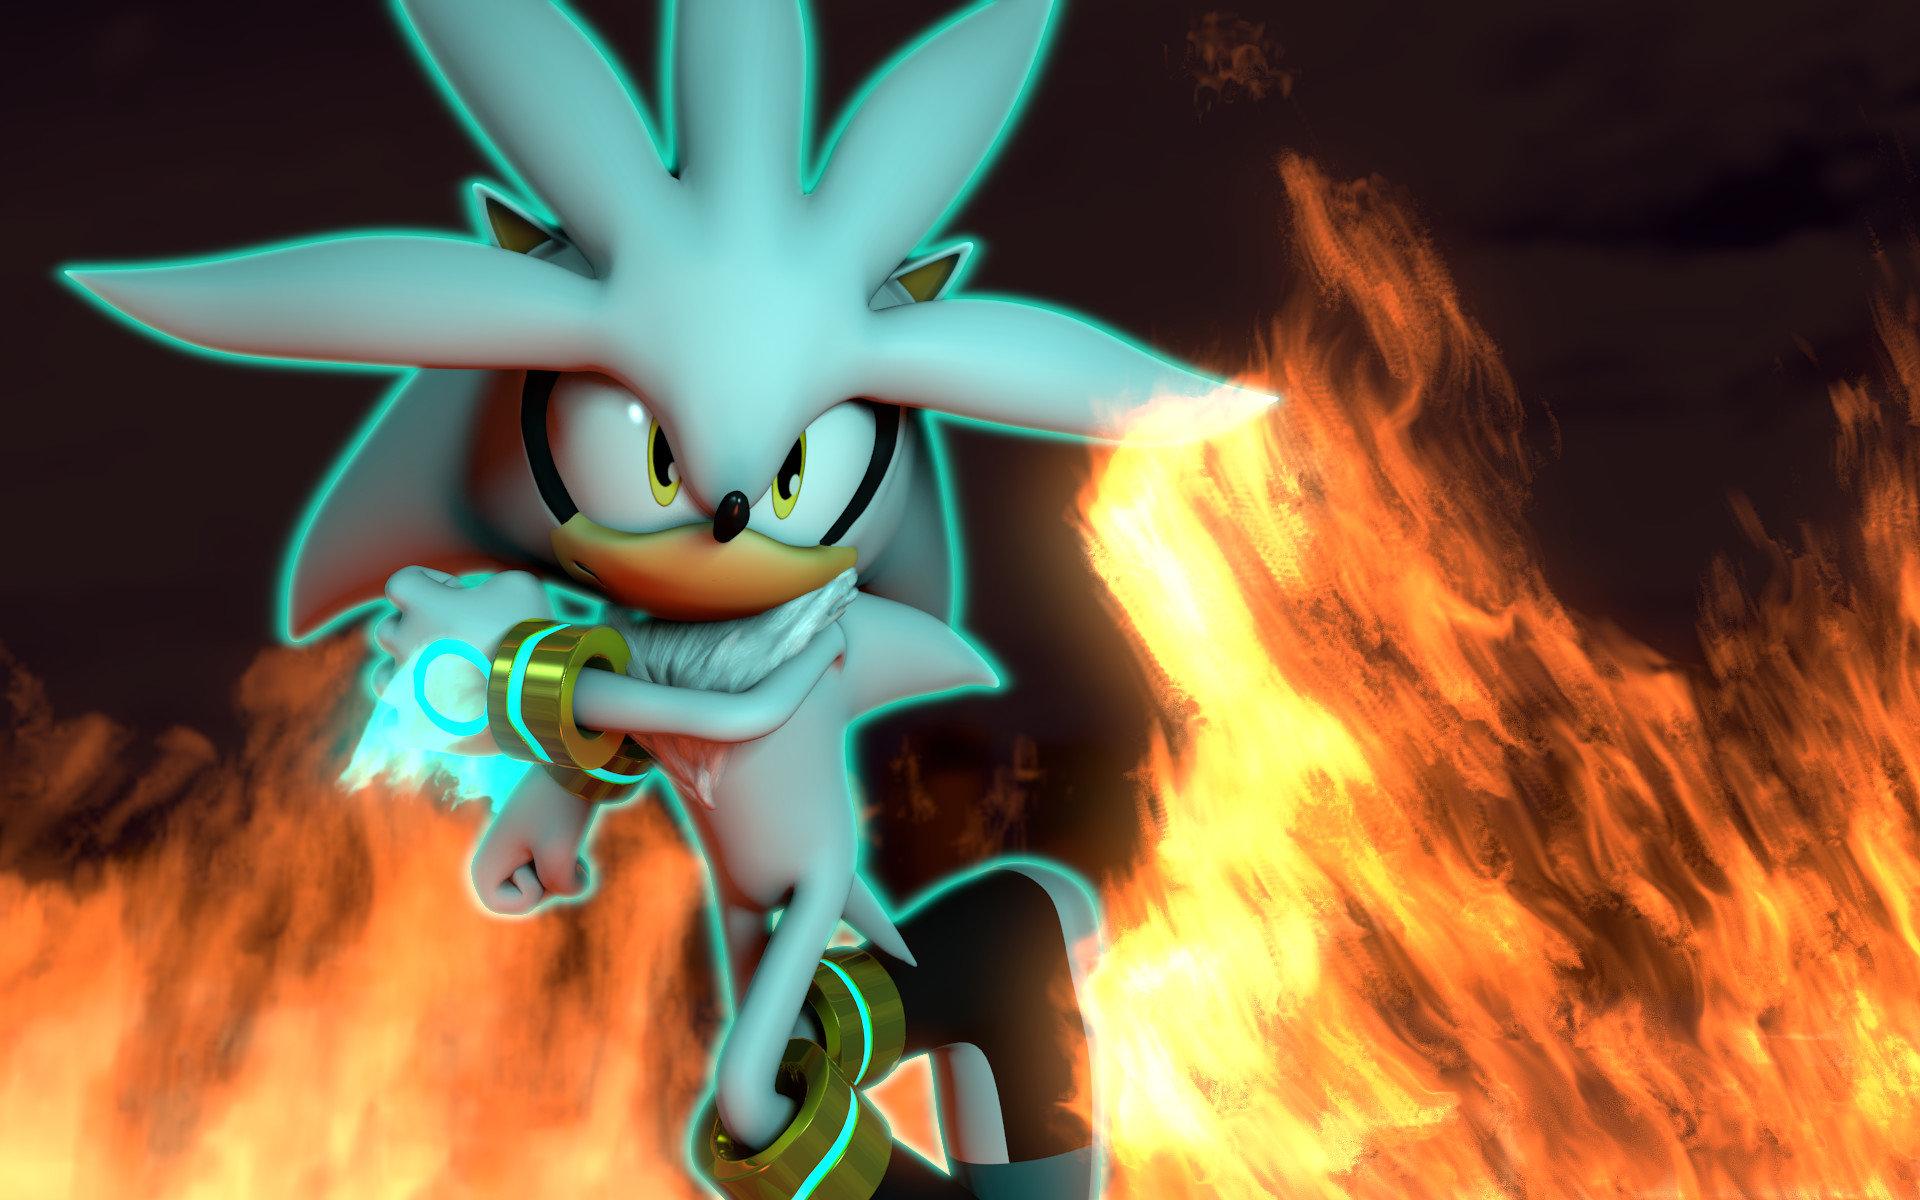 Silver the Hedgehog Wallpapers - Top Free Silver the Hedgehog